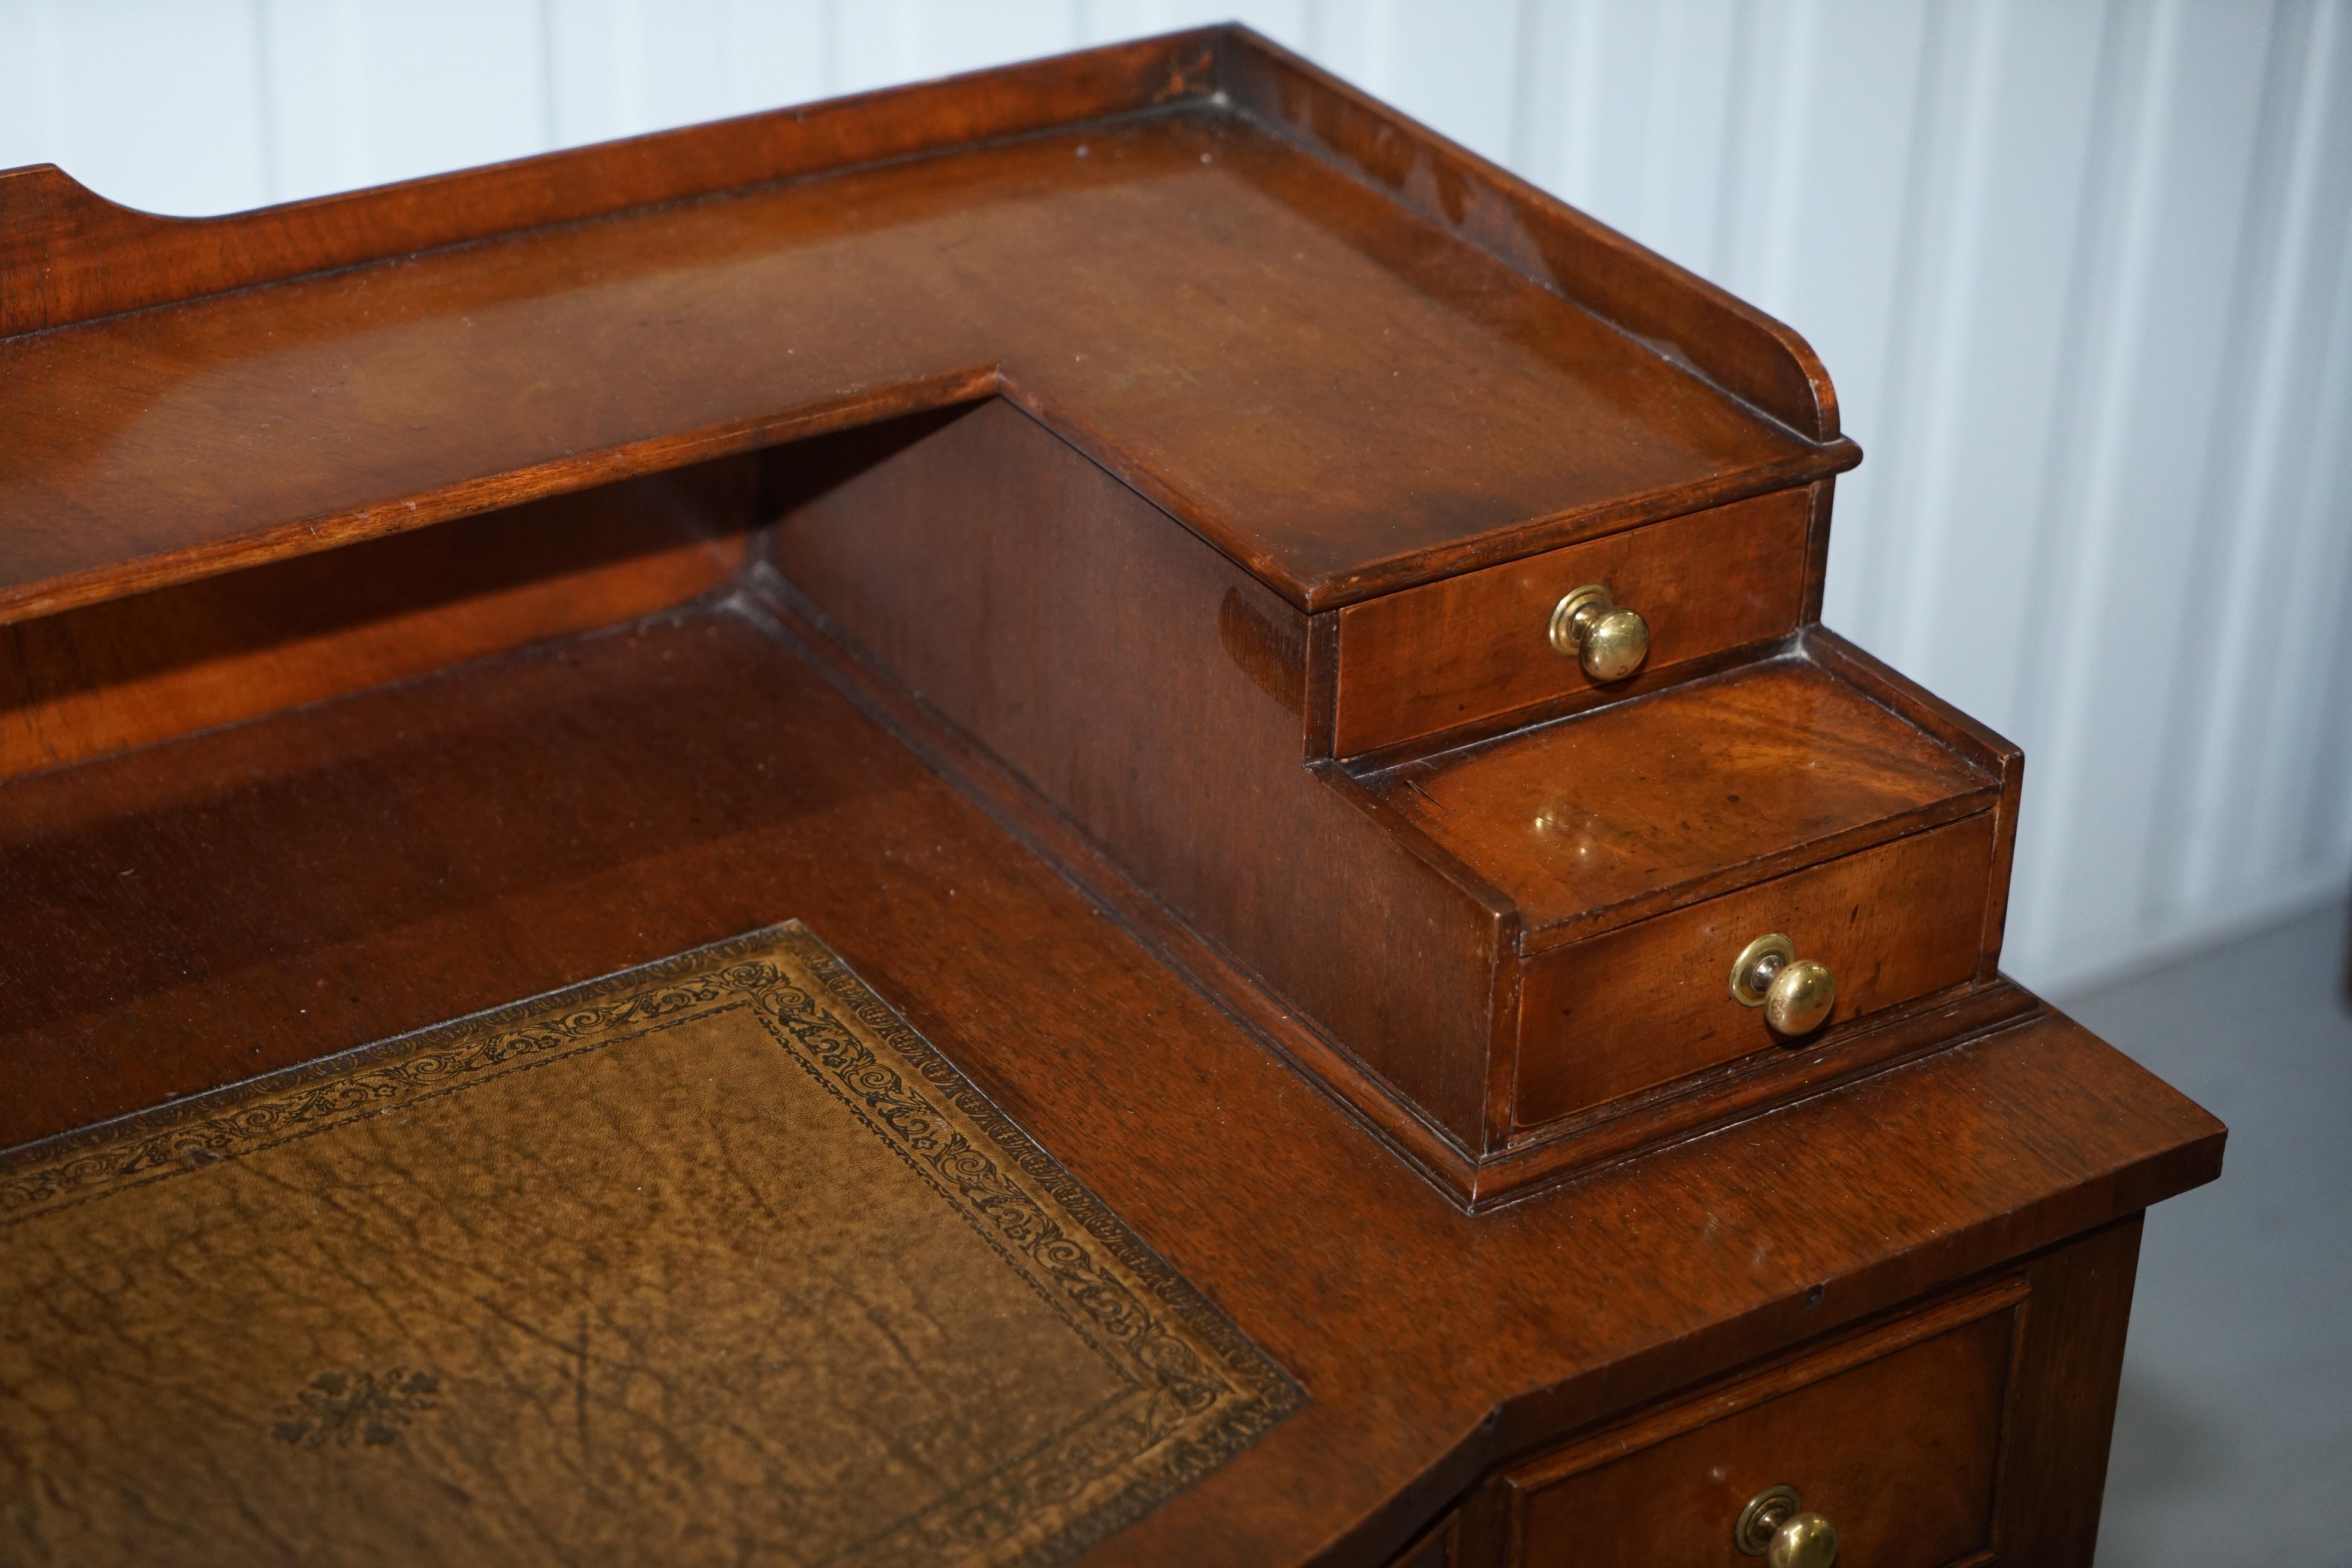 Regency Light Mahogany Bevan Funnell Desk, Leather Writing Surface and Drawers